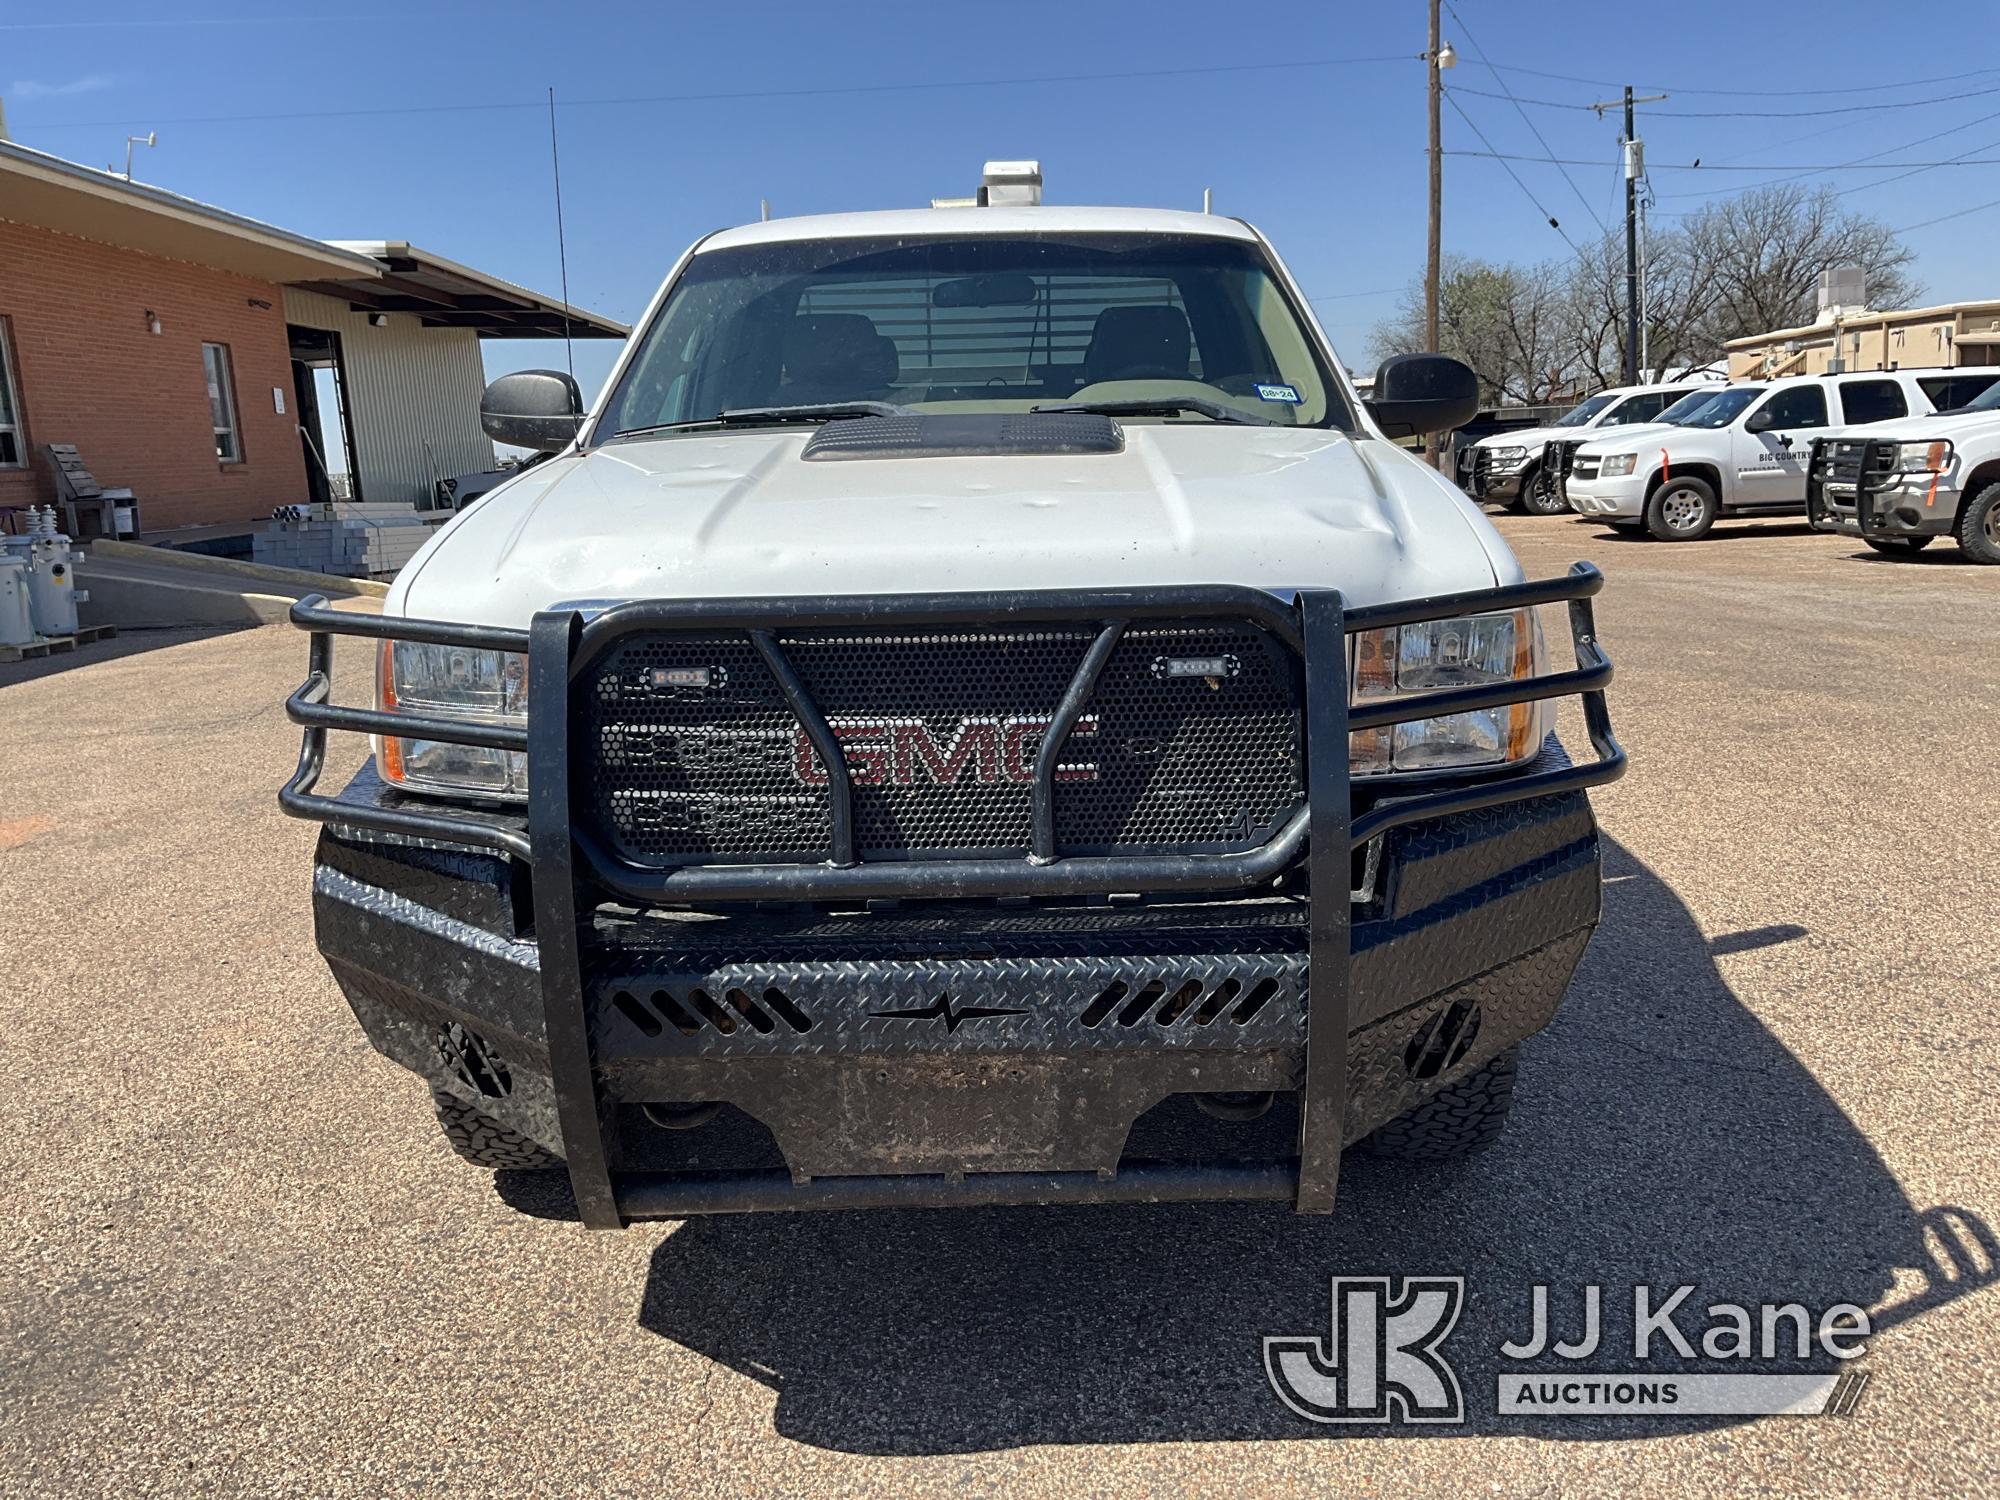 (Roby, TX) 2013 GMC Sierra 2500HD 4x4 Extended-Cab Pickup Truck, Cooperative owned Runs and Moves, P